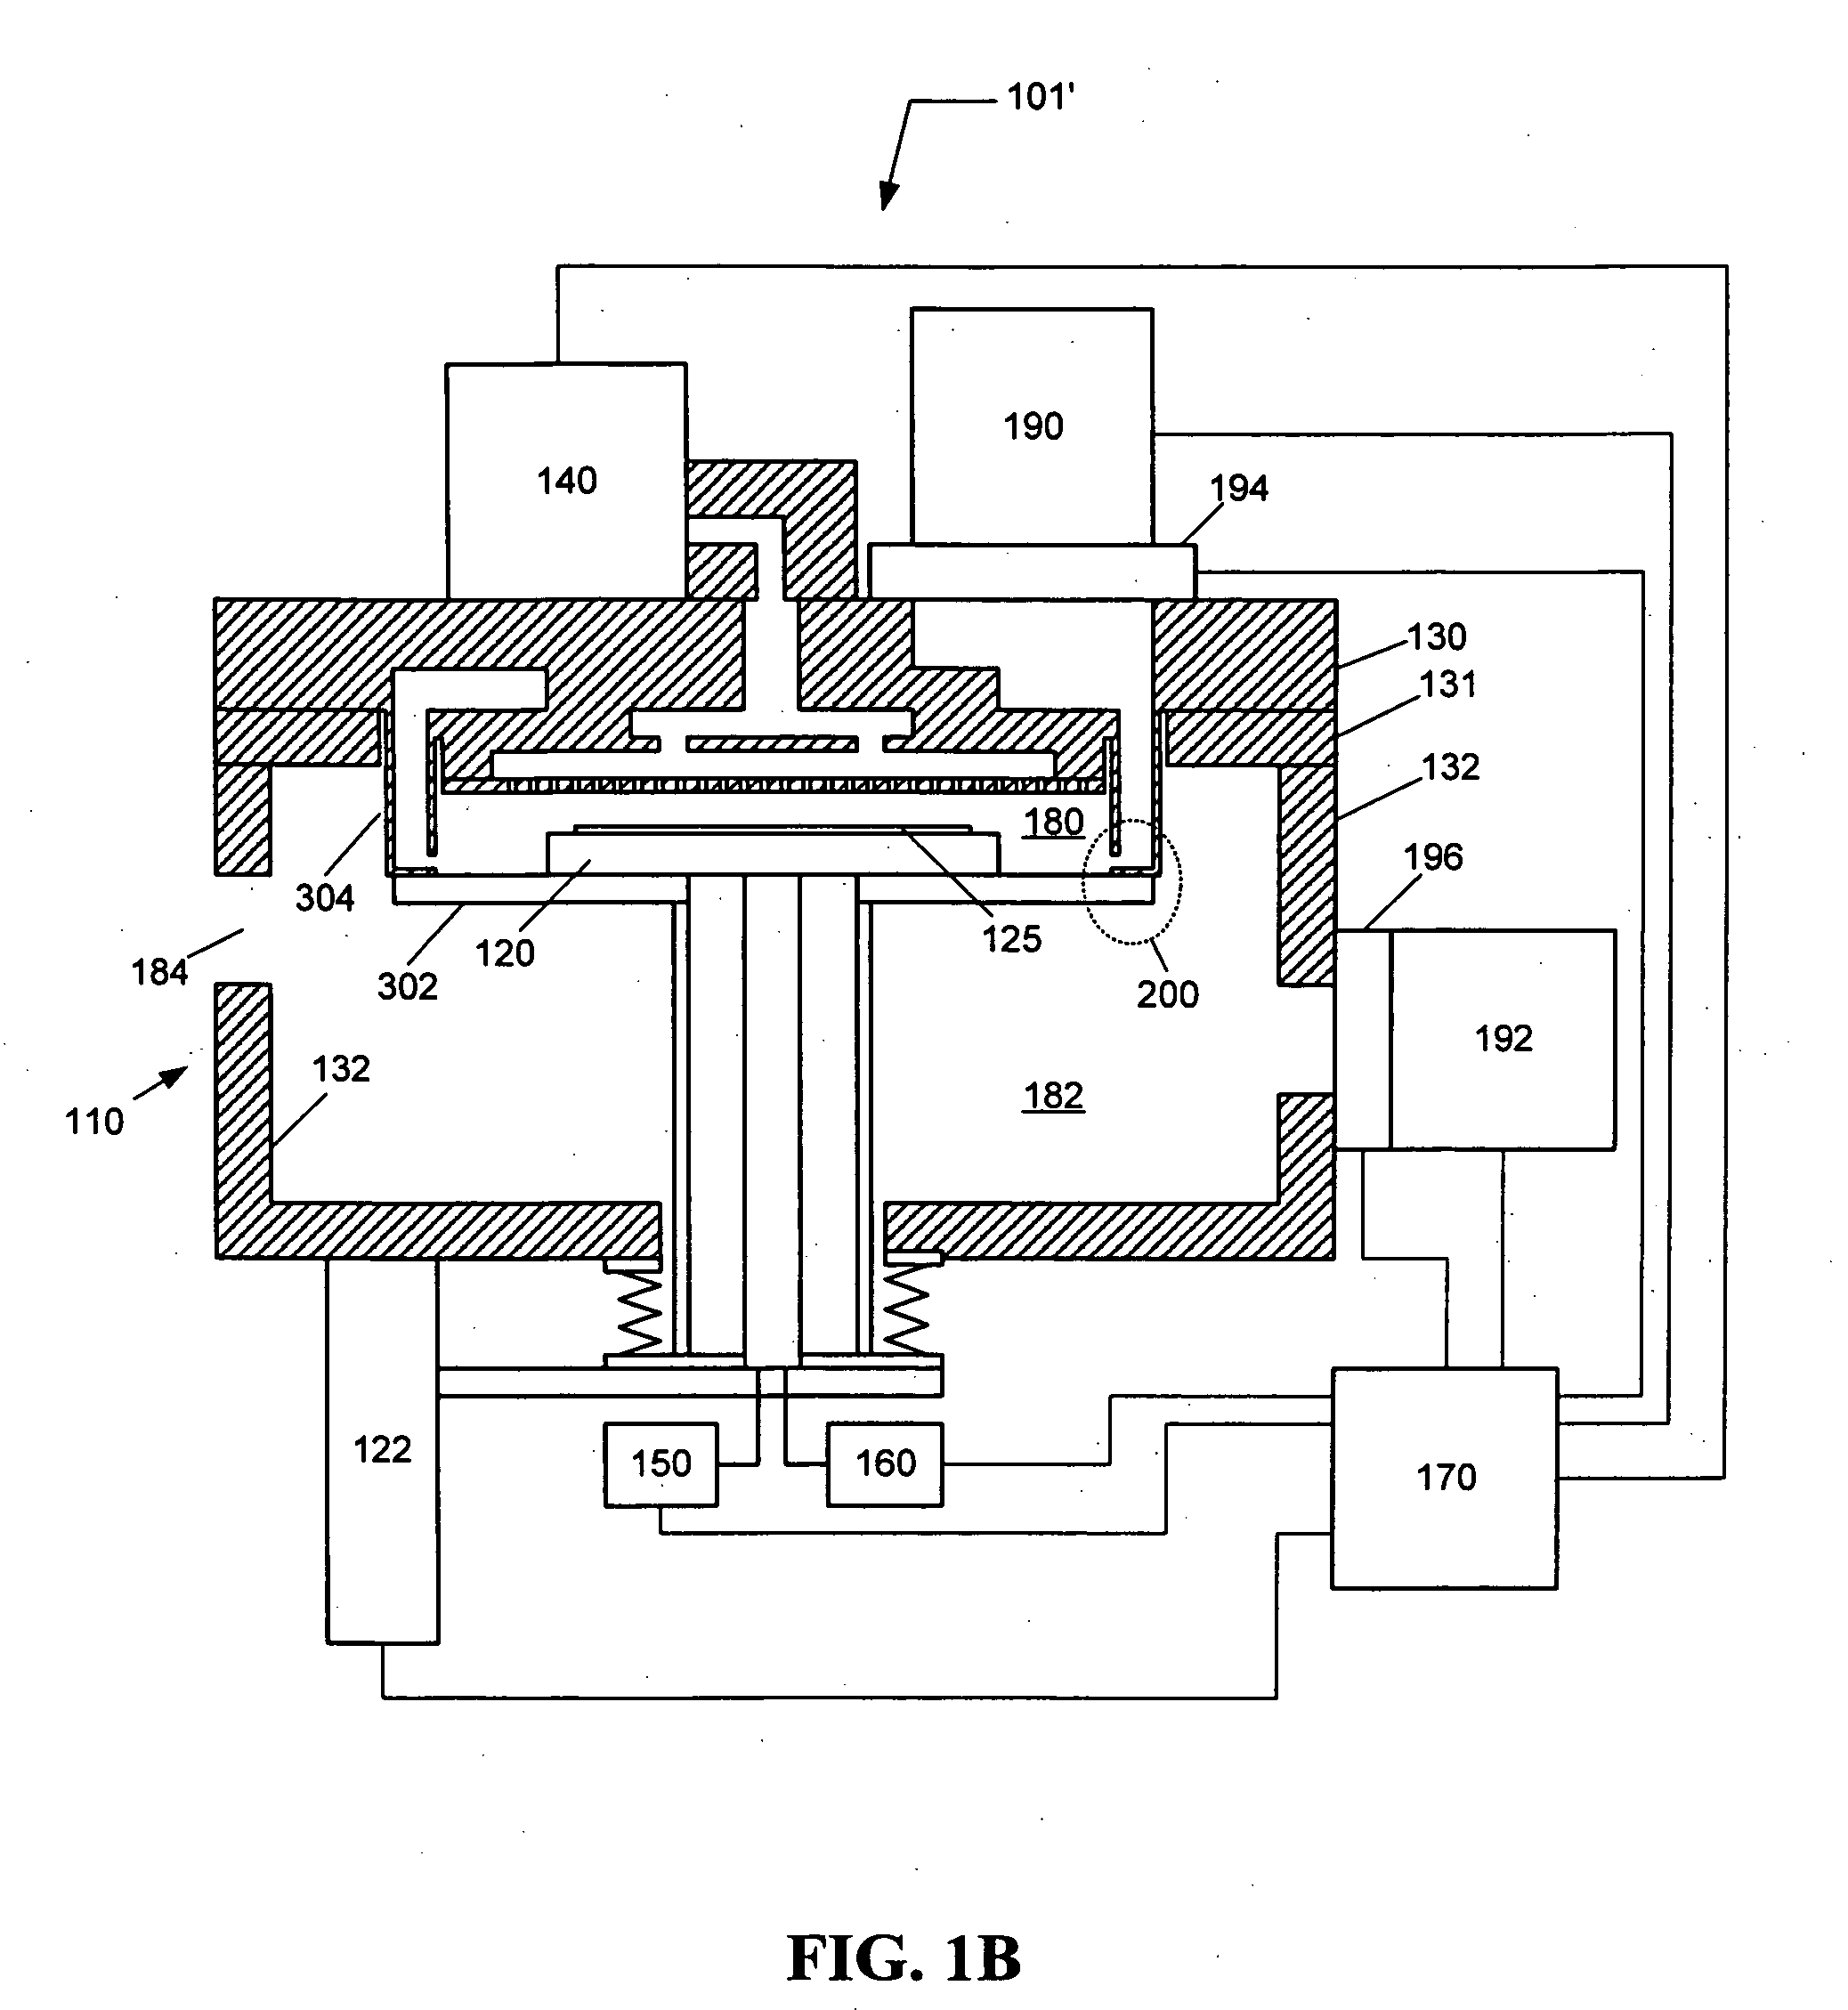 Method and system for sealing a first assembly to a second assembly of a processing system